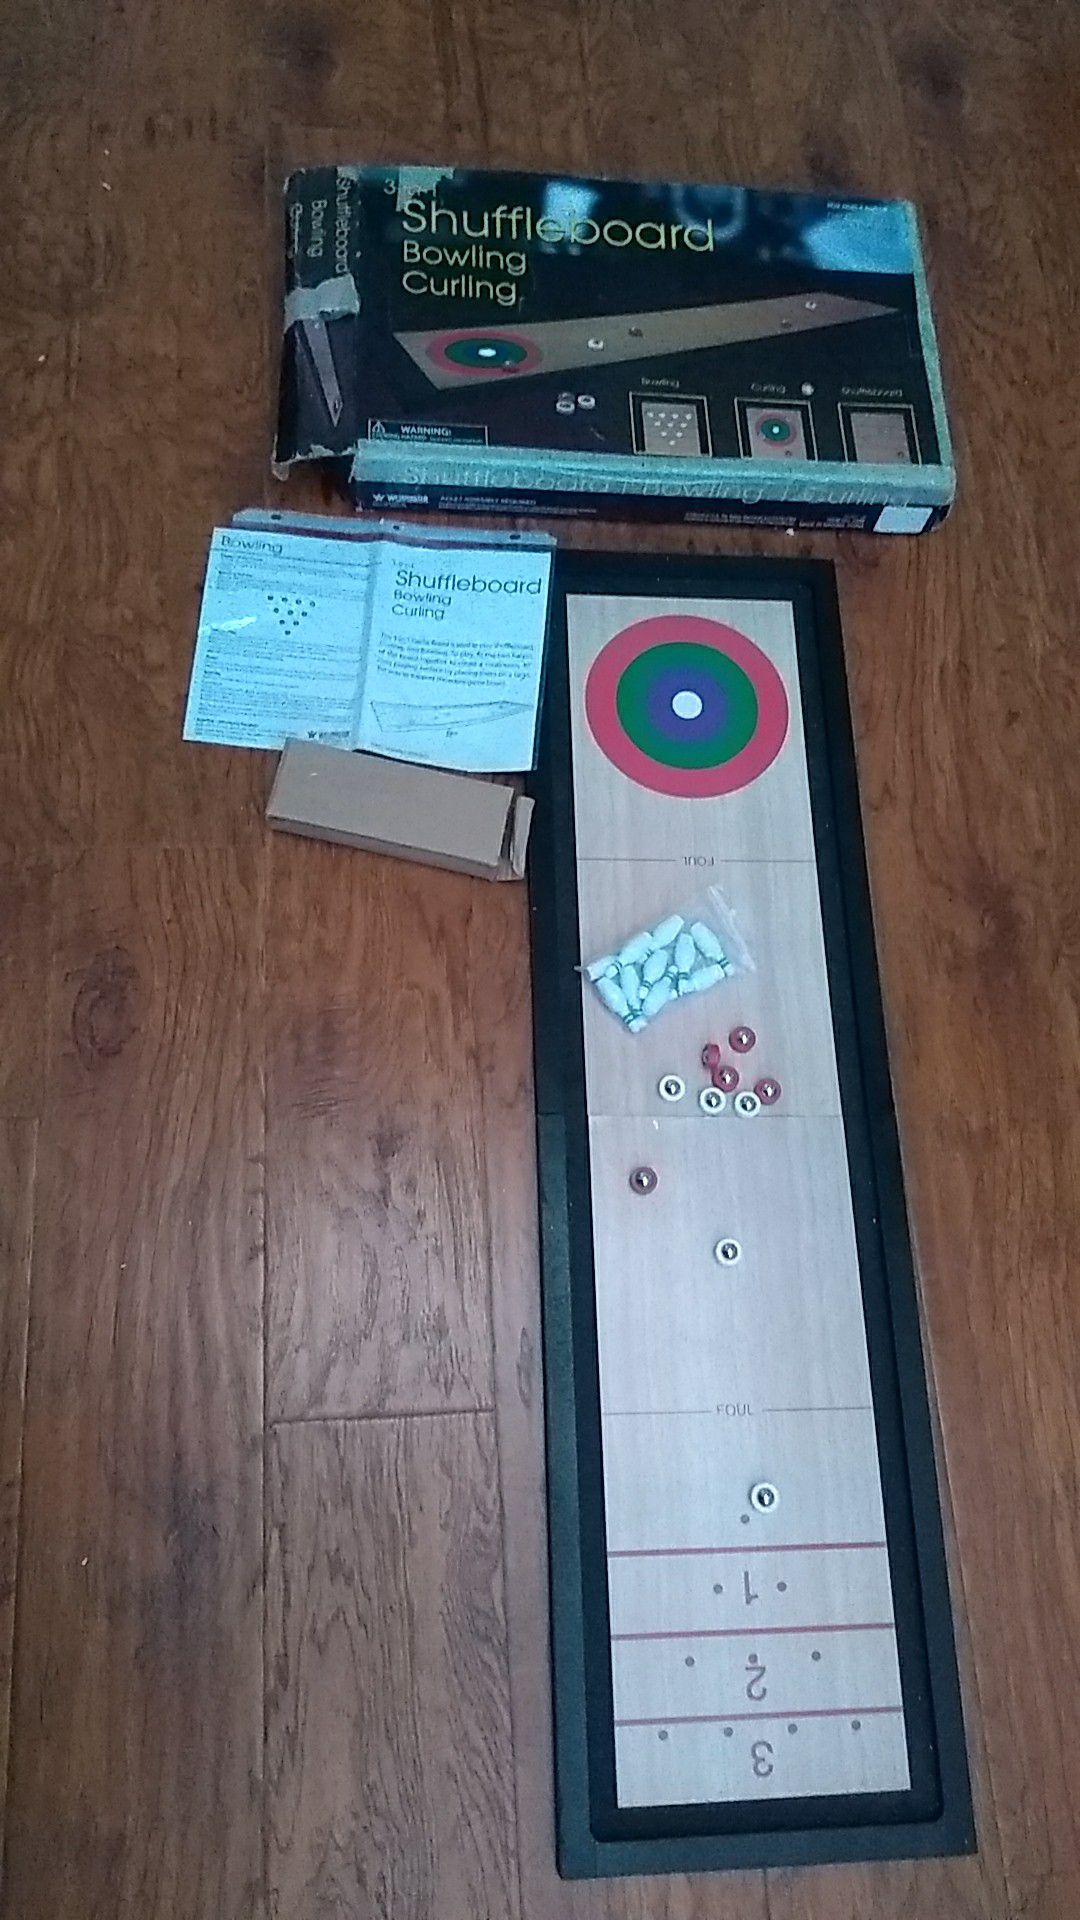 Shuffle board , bowling, curling ,3 games comes with instructions how to play the games!!